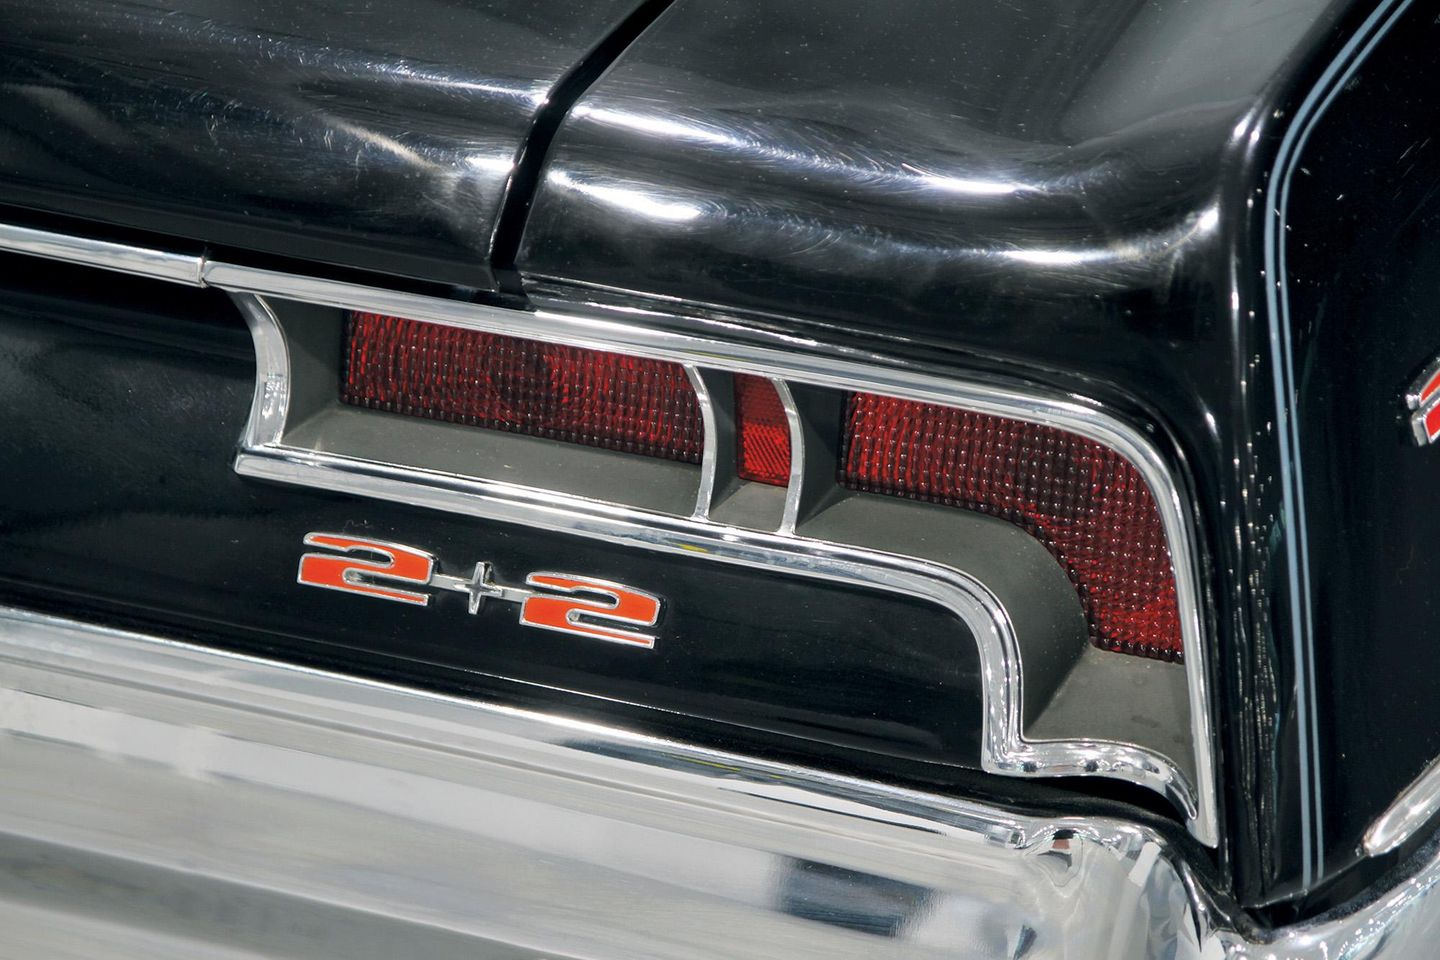 Color closeup of the tail lamps and rear 2+2 badging on the tail panel of a 1967 Pontiac Catalina 2+2.